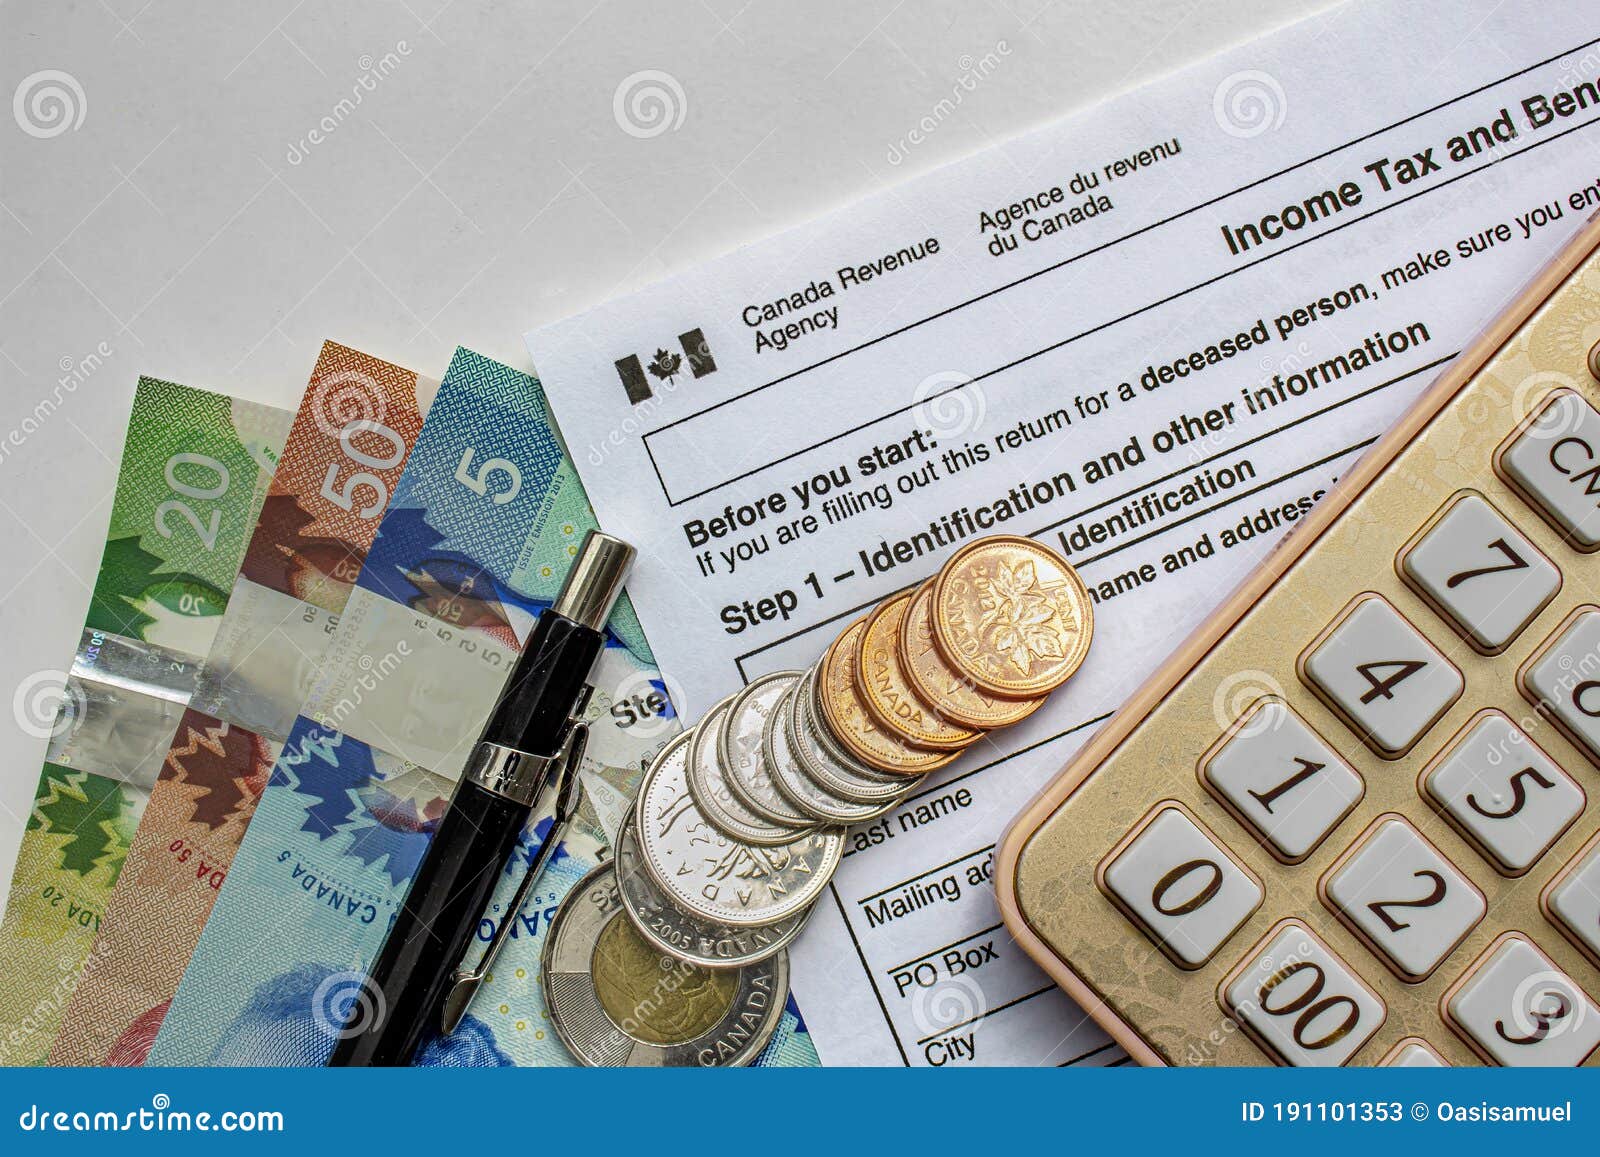 Canadian Tax Forms with Coins, Calculator, a Pen and Bills on a White